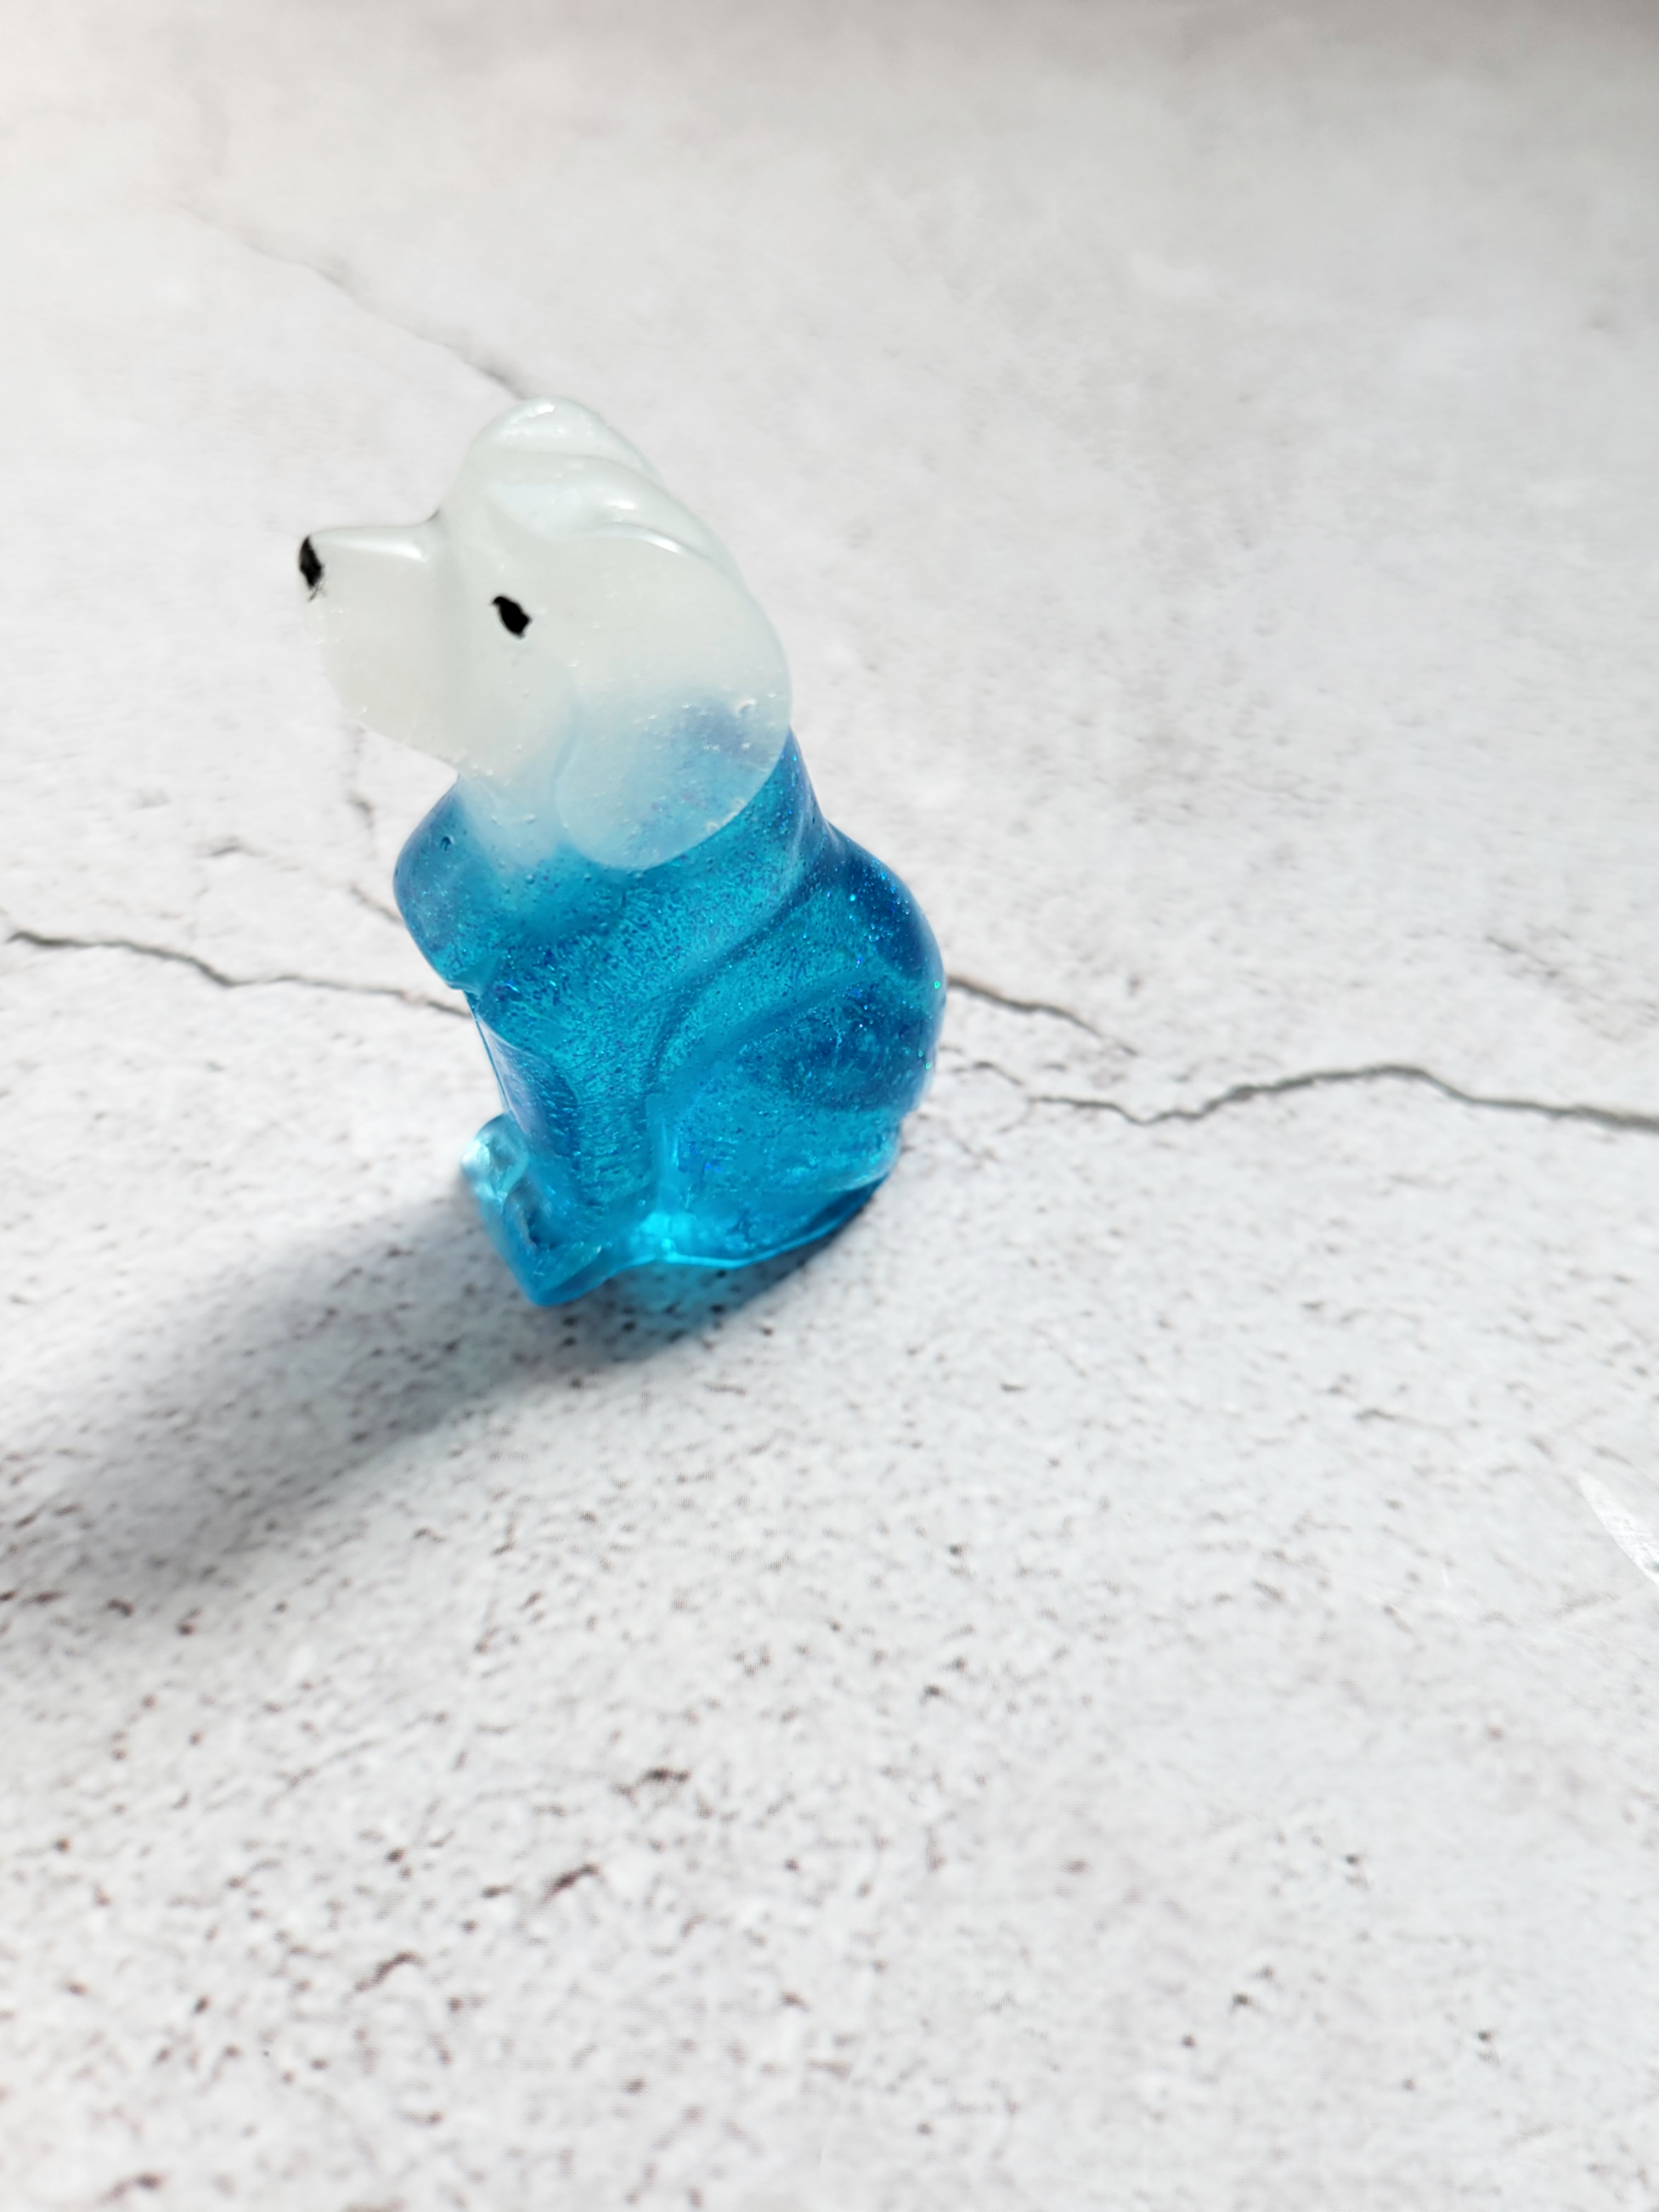 A side view of a tall slim dog figure with a translucent blue body, white head, black painted eyes and nose.